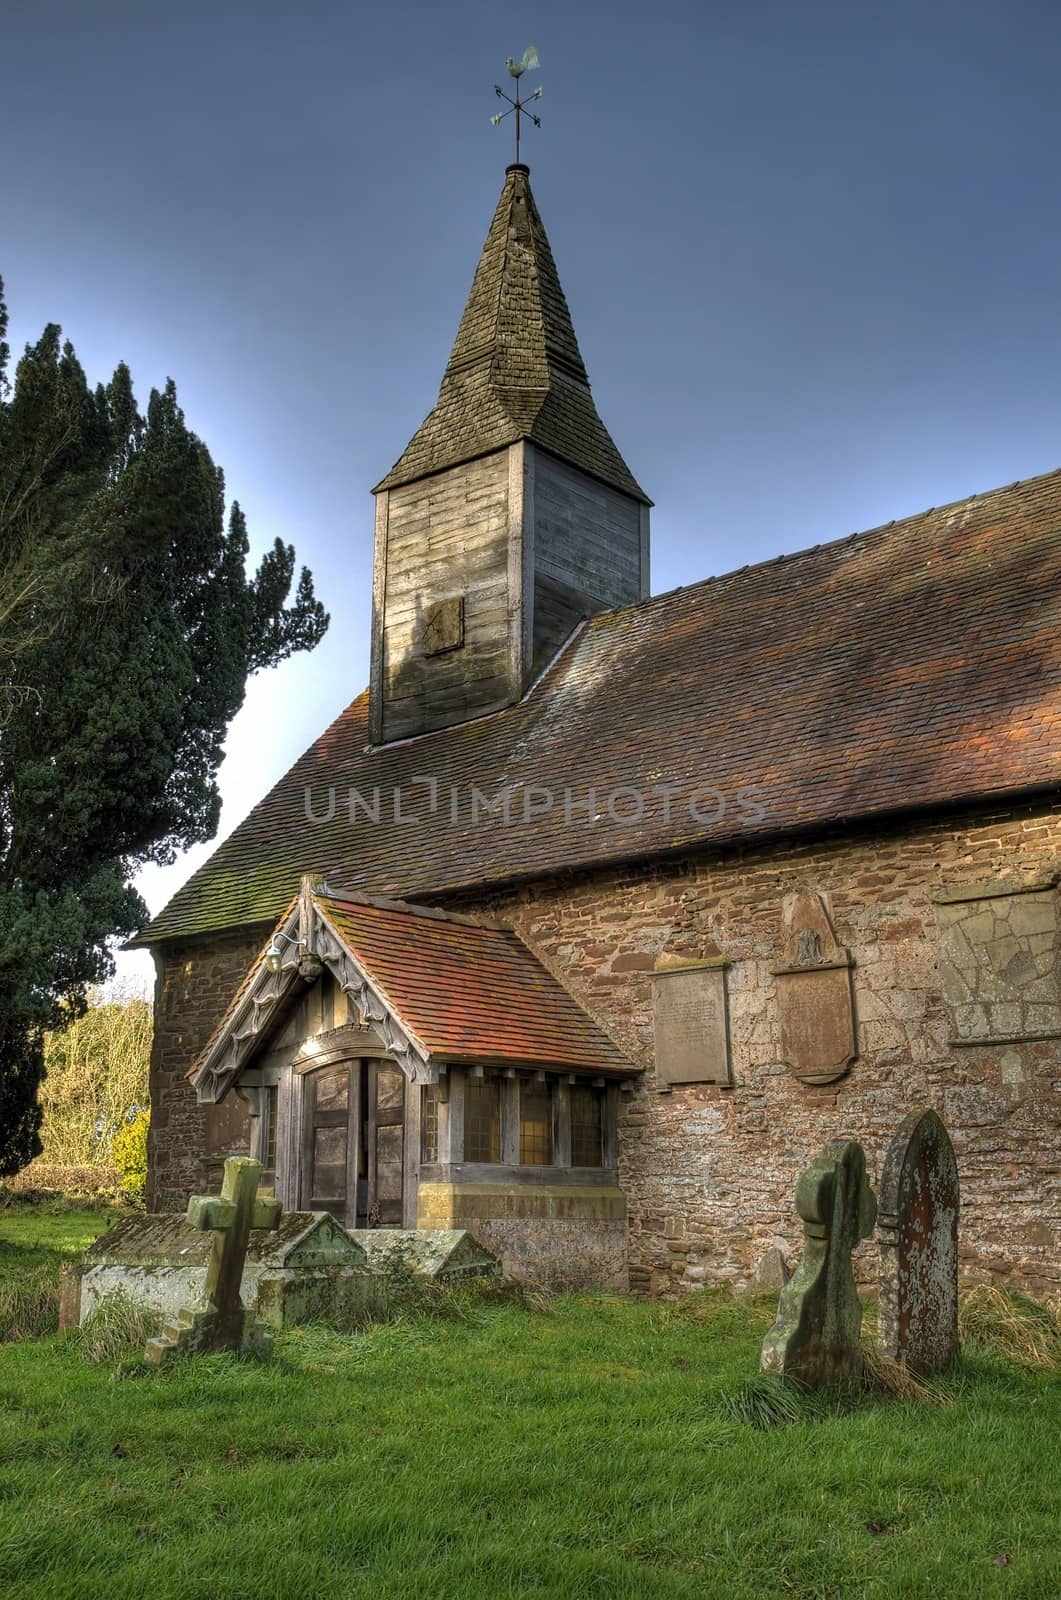 Small stone church, England by andrewroland